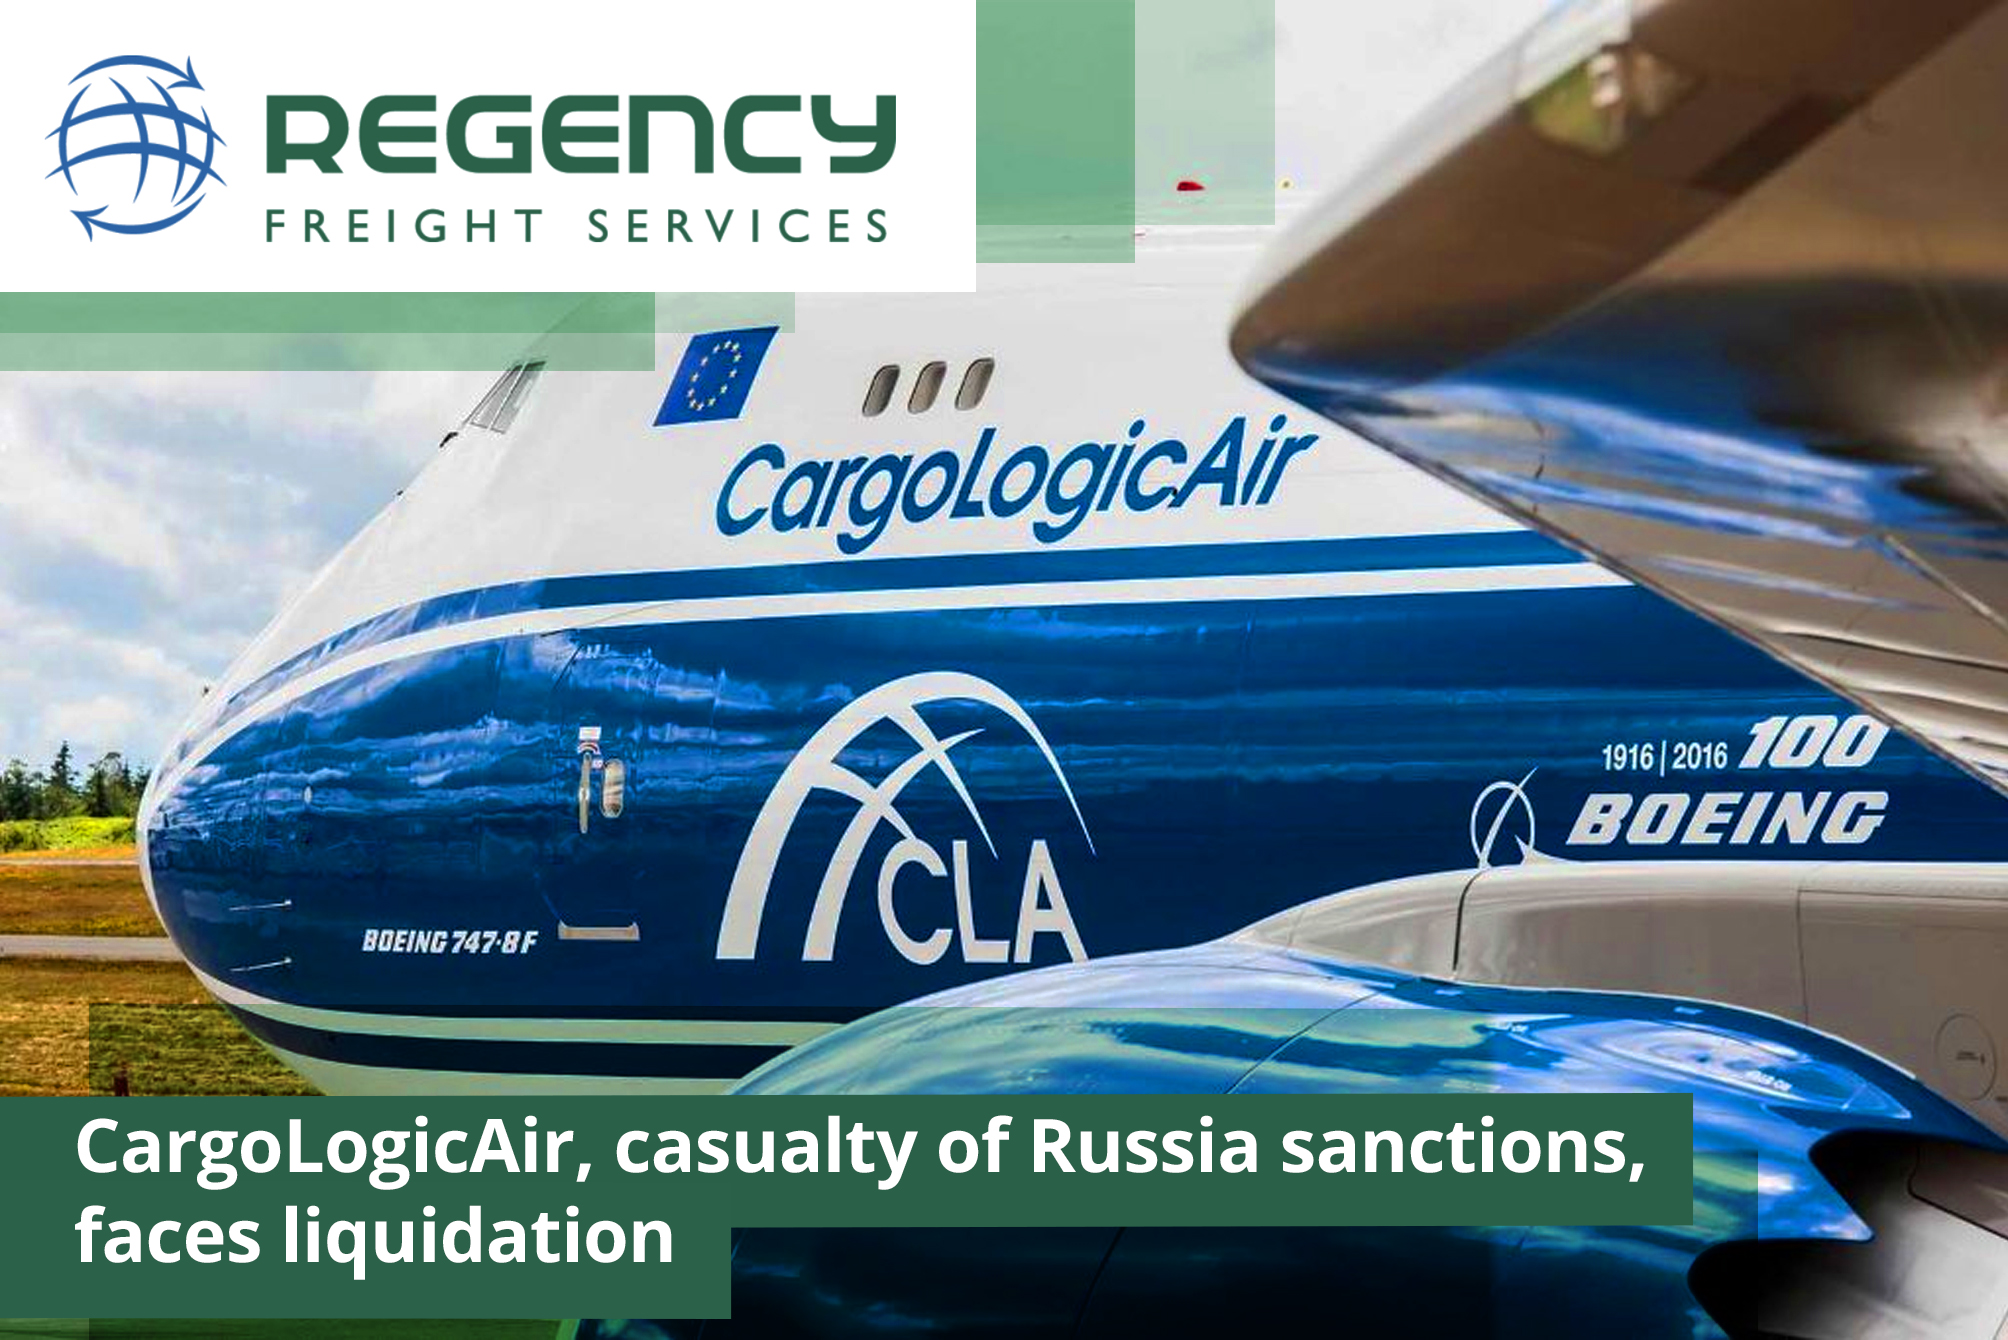 CargoLogicAir, casualty of Russia sanctions, faces liquidation